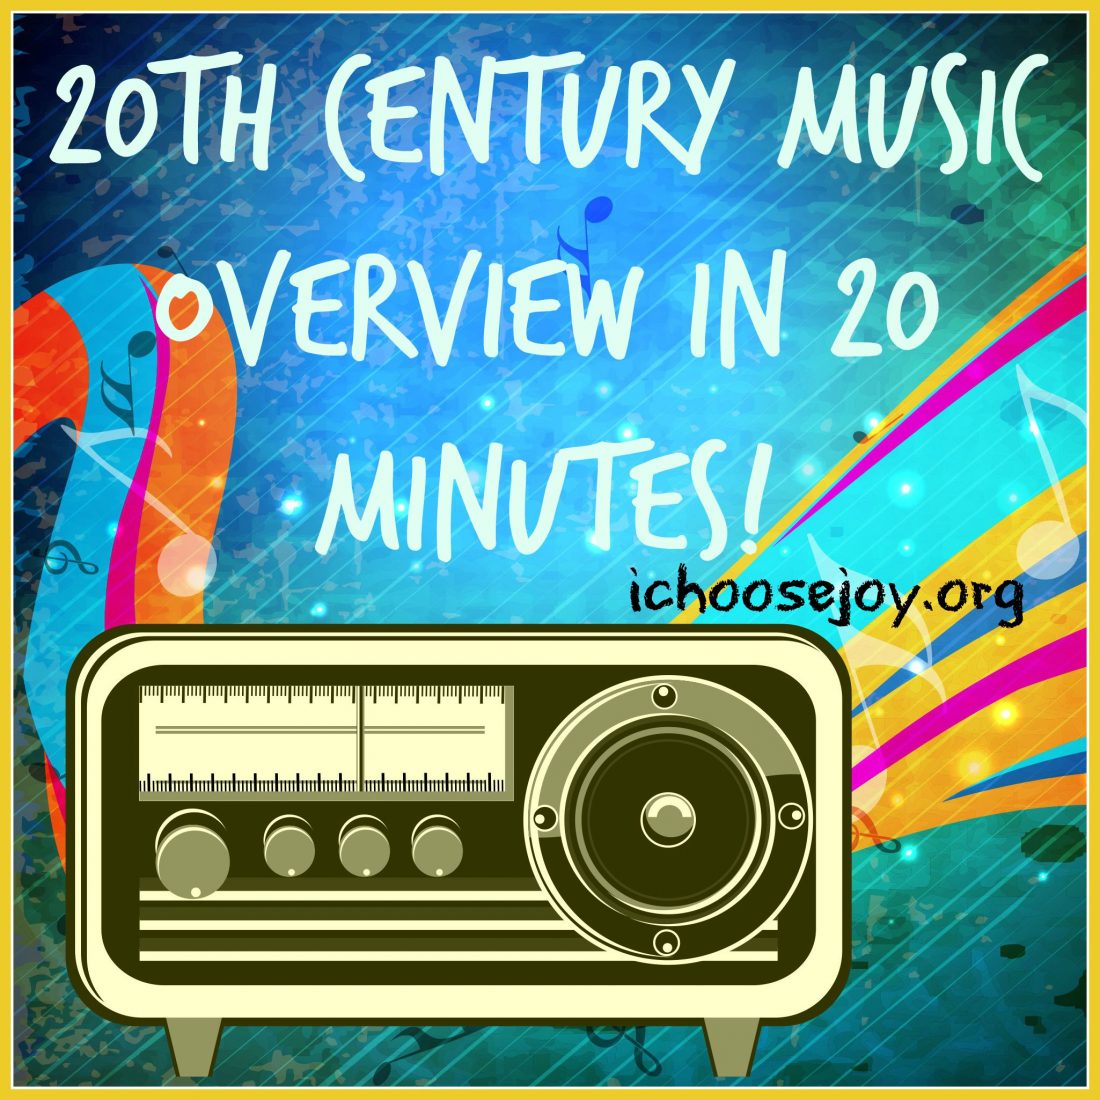 20th Century Music Overview in 20 Minutes